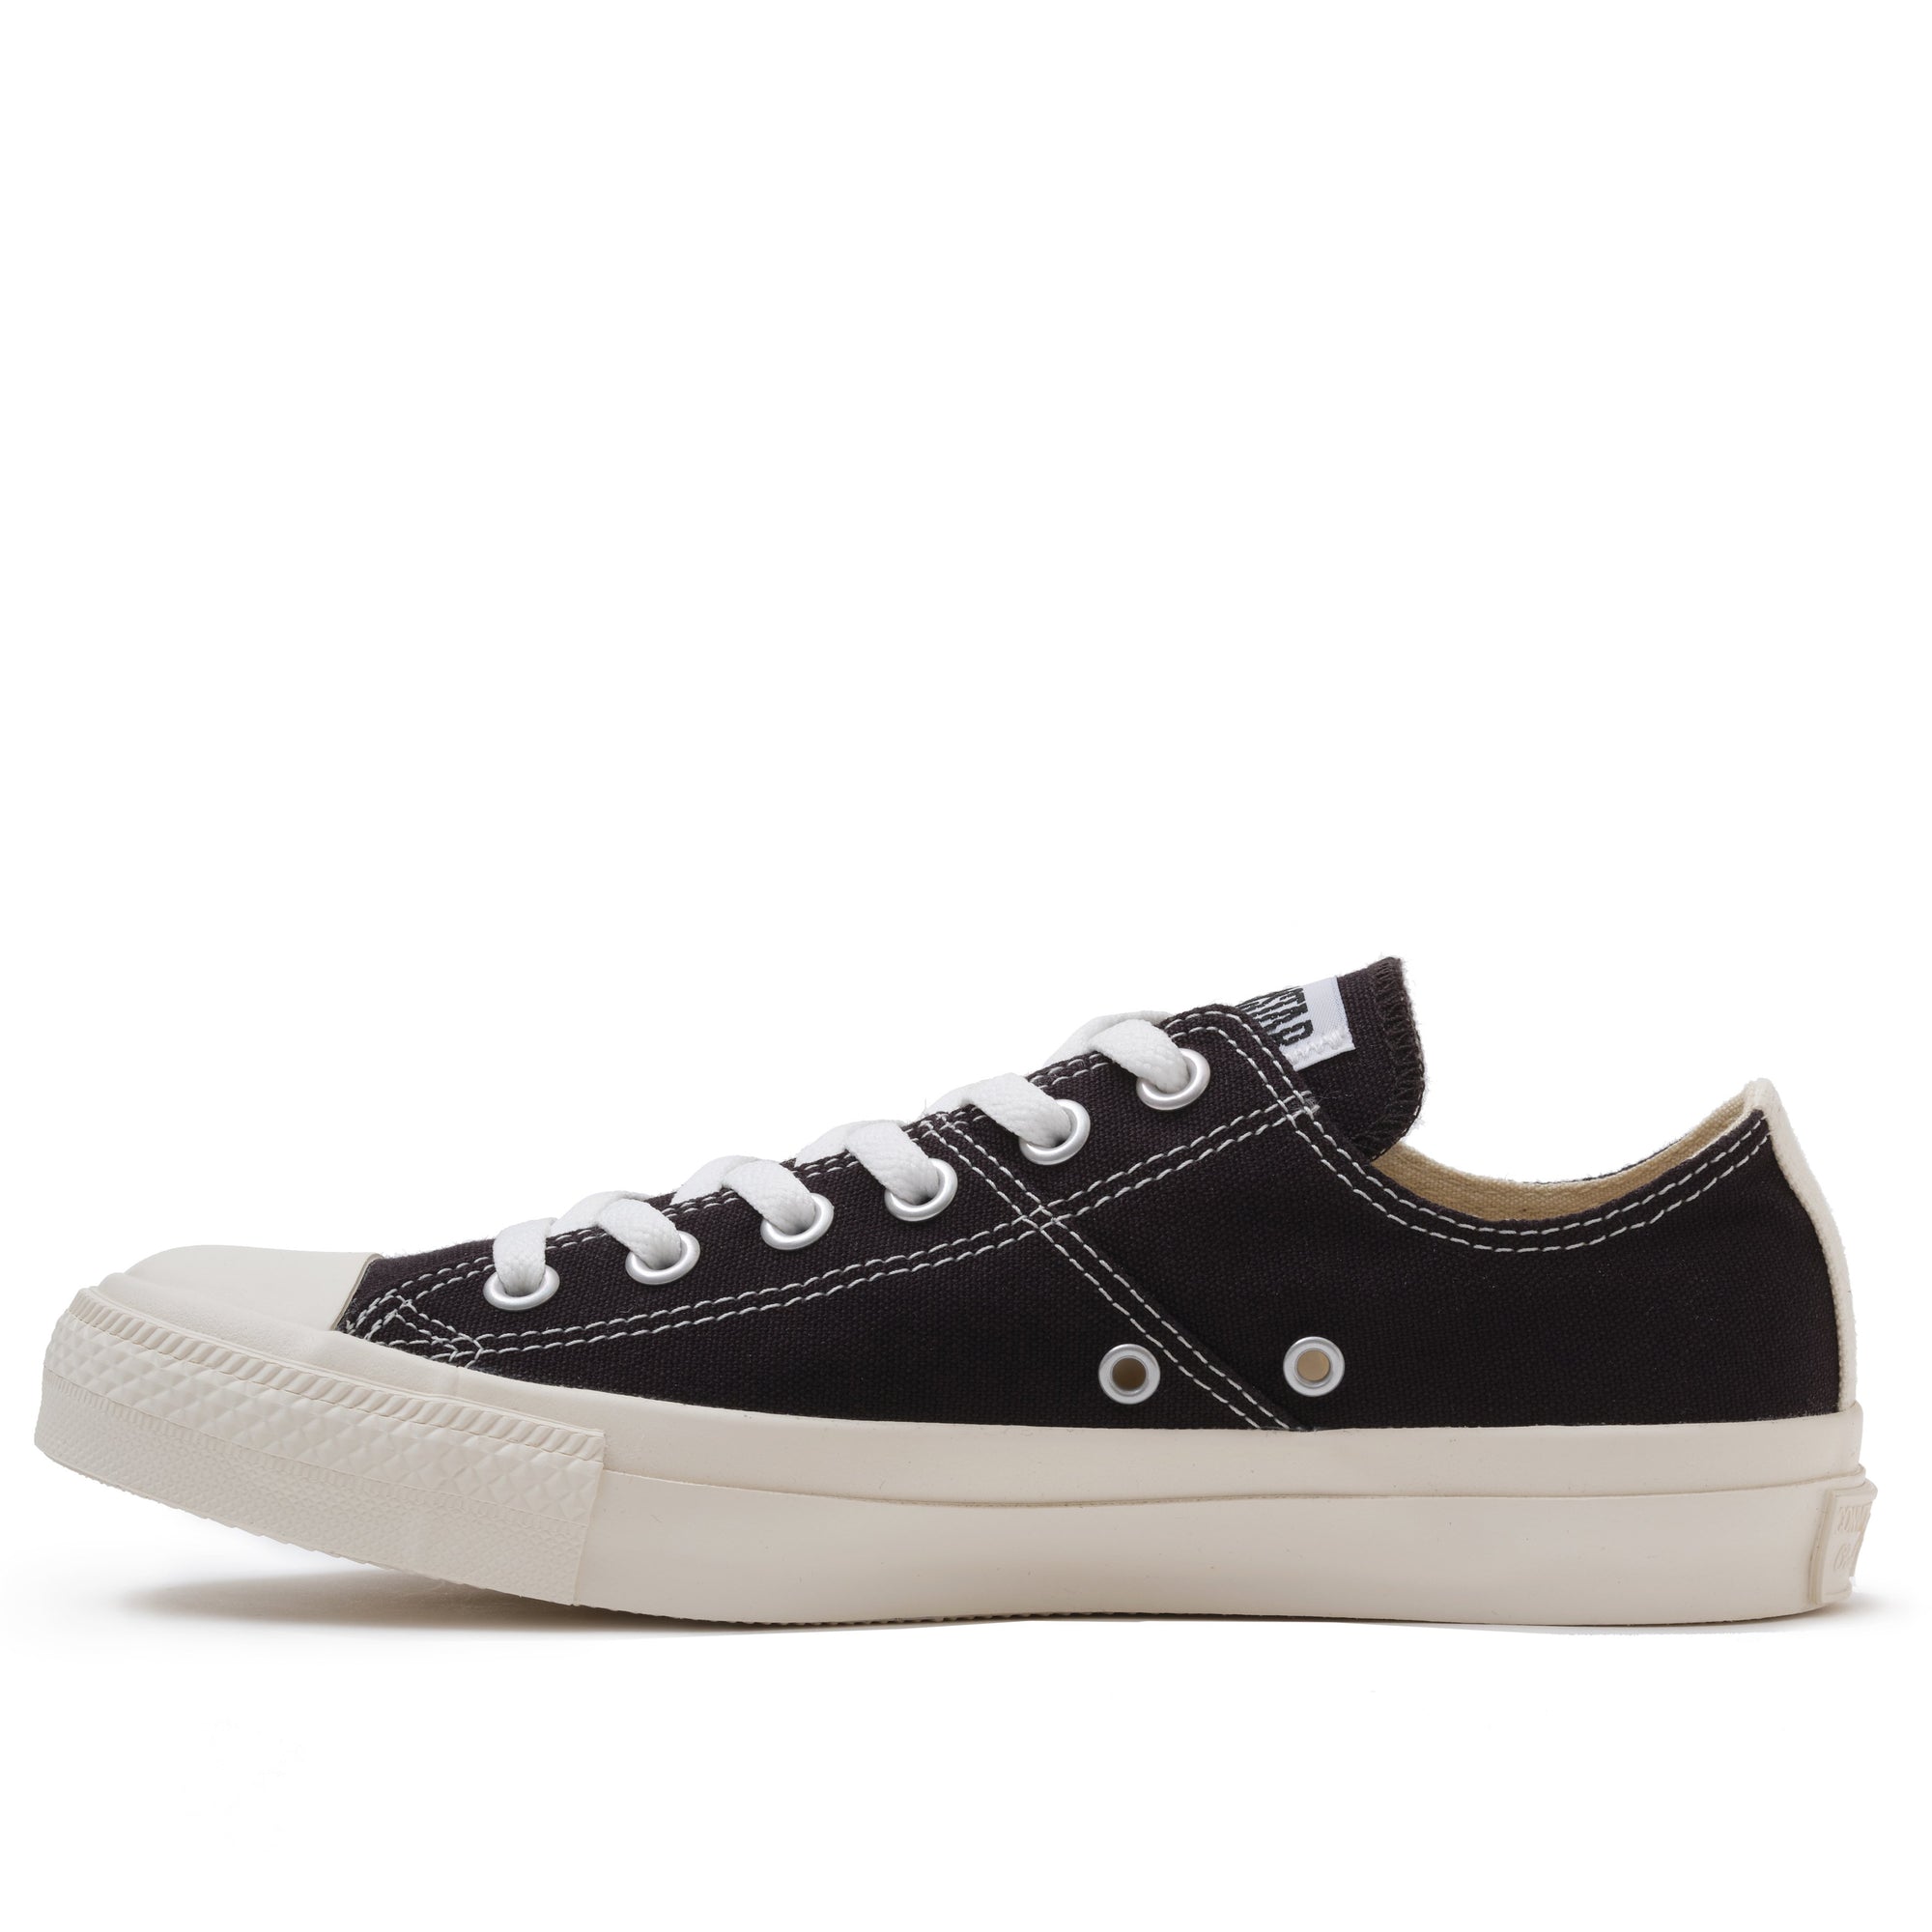 PLAY CDG CONVERSE - ALL STAR LOW - (BLACK) view 2